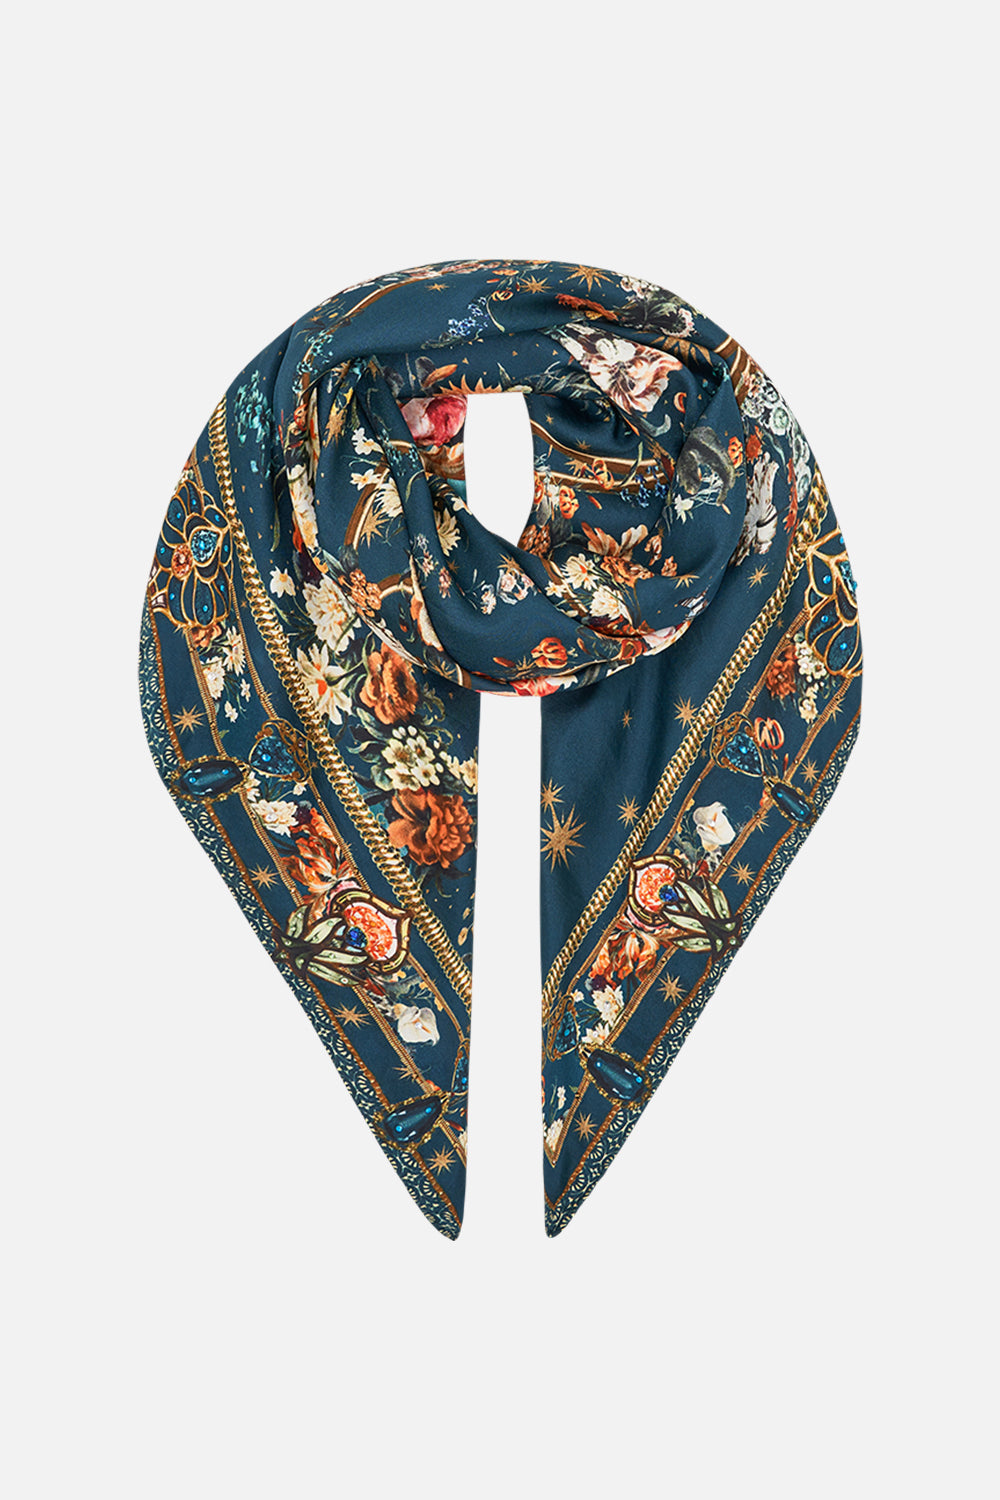 CAMILLA silk scarf in She Who Wears The Crown print